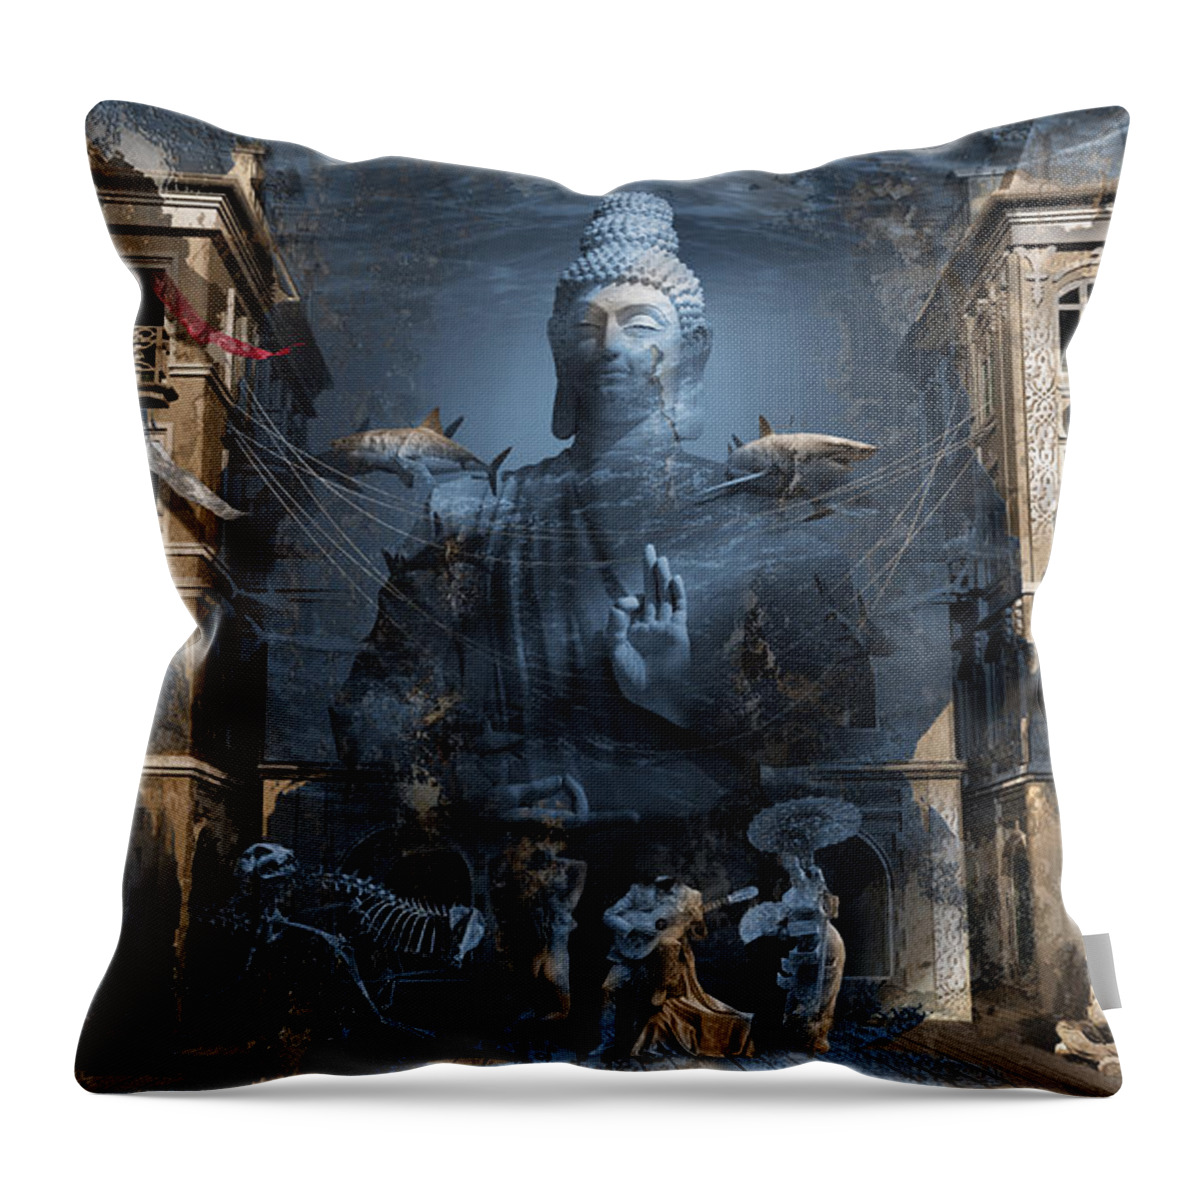 Omnipresence Throw Pillow featuring the digital art Omnipresence by George Grie